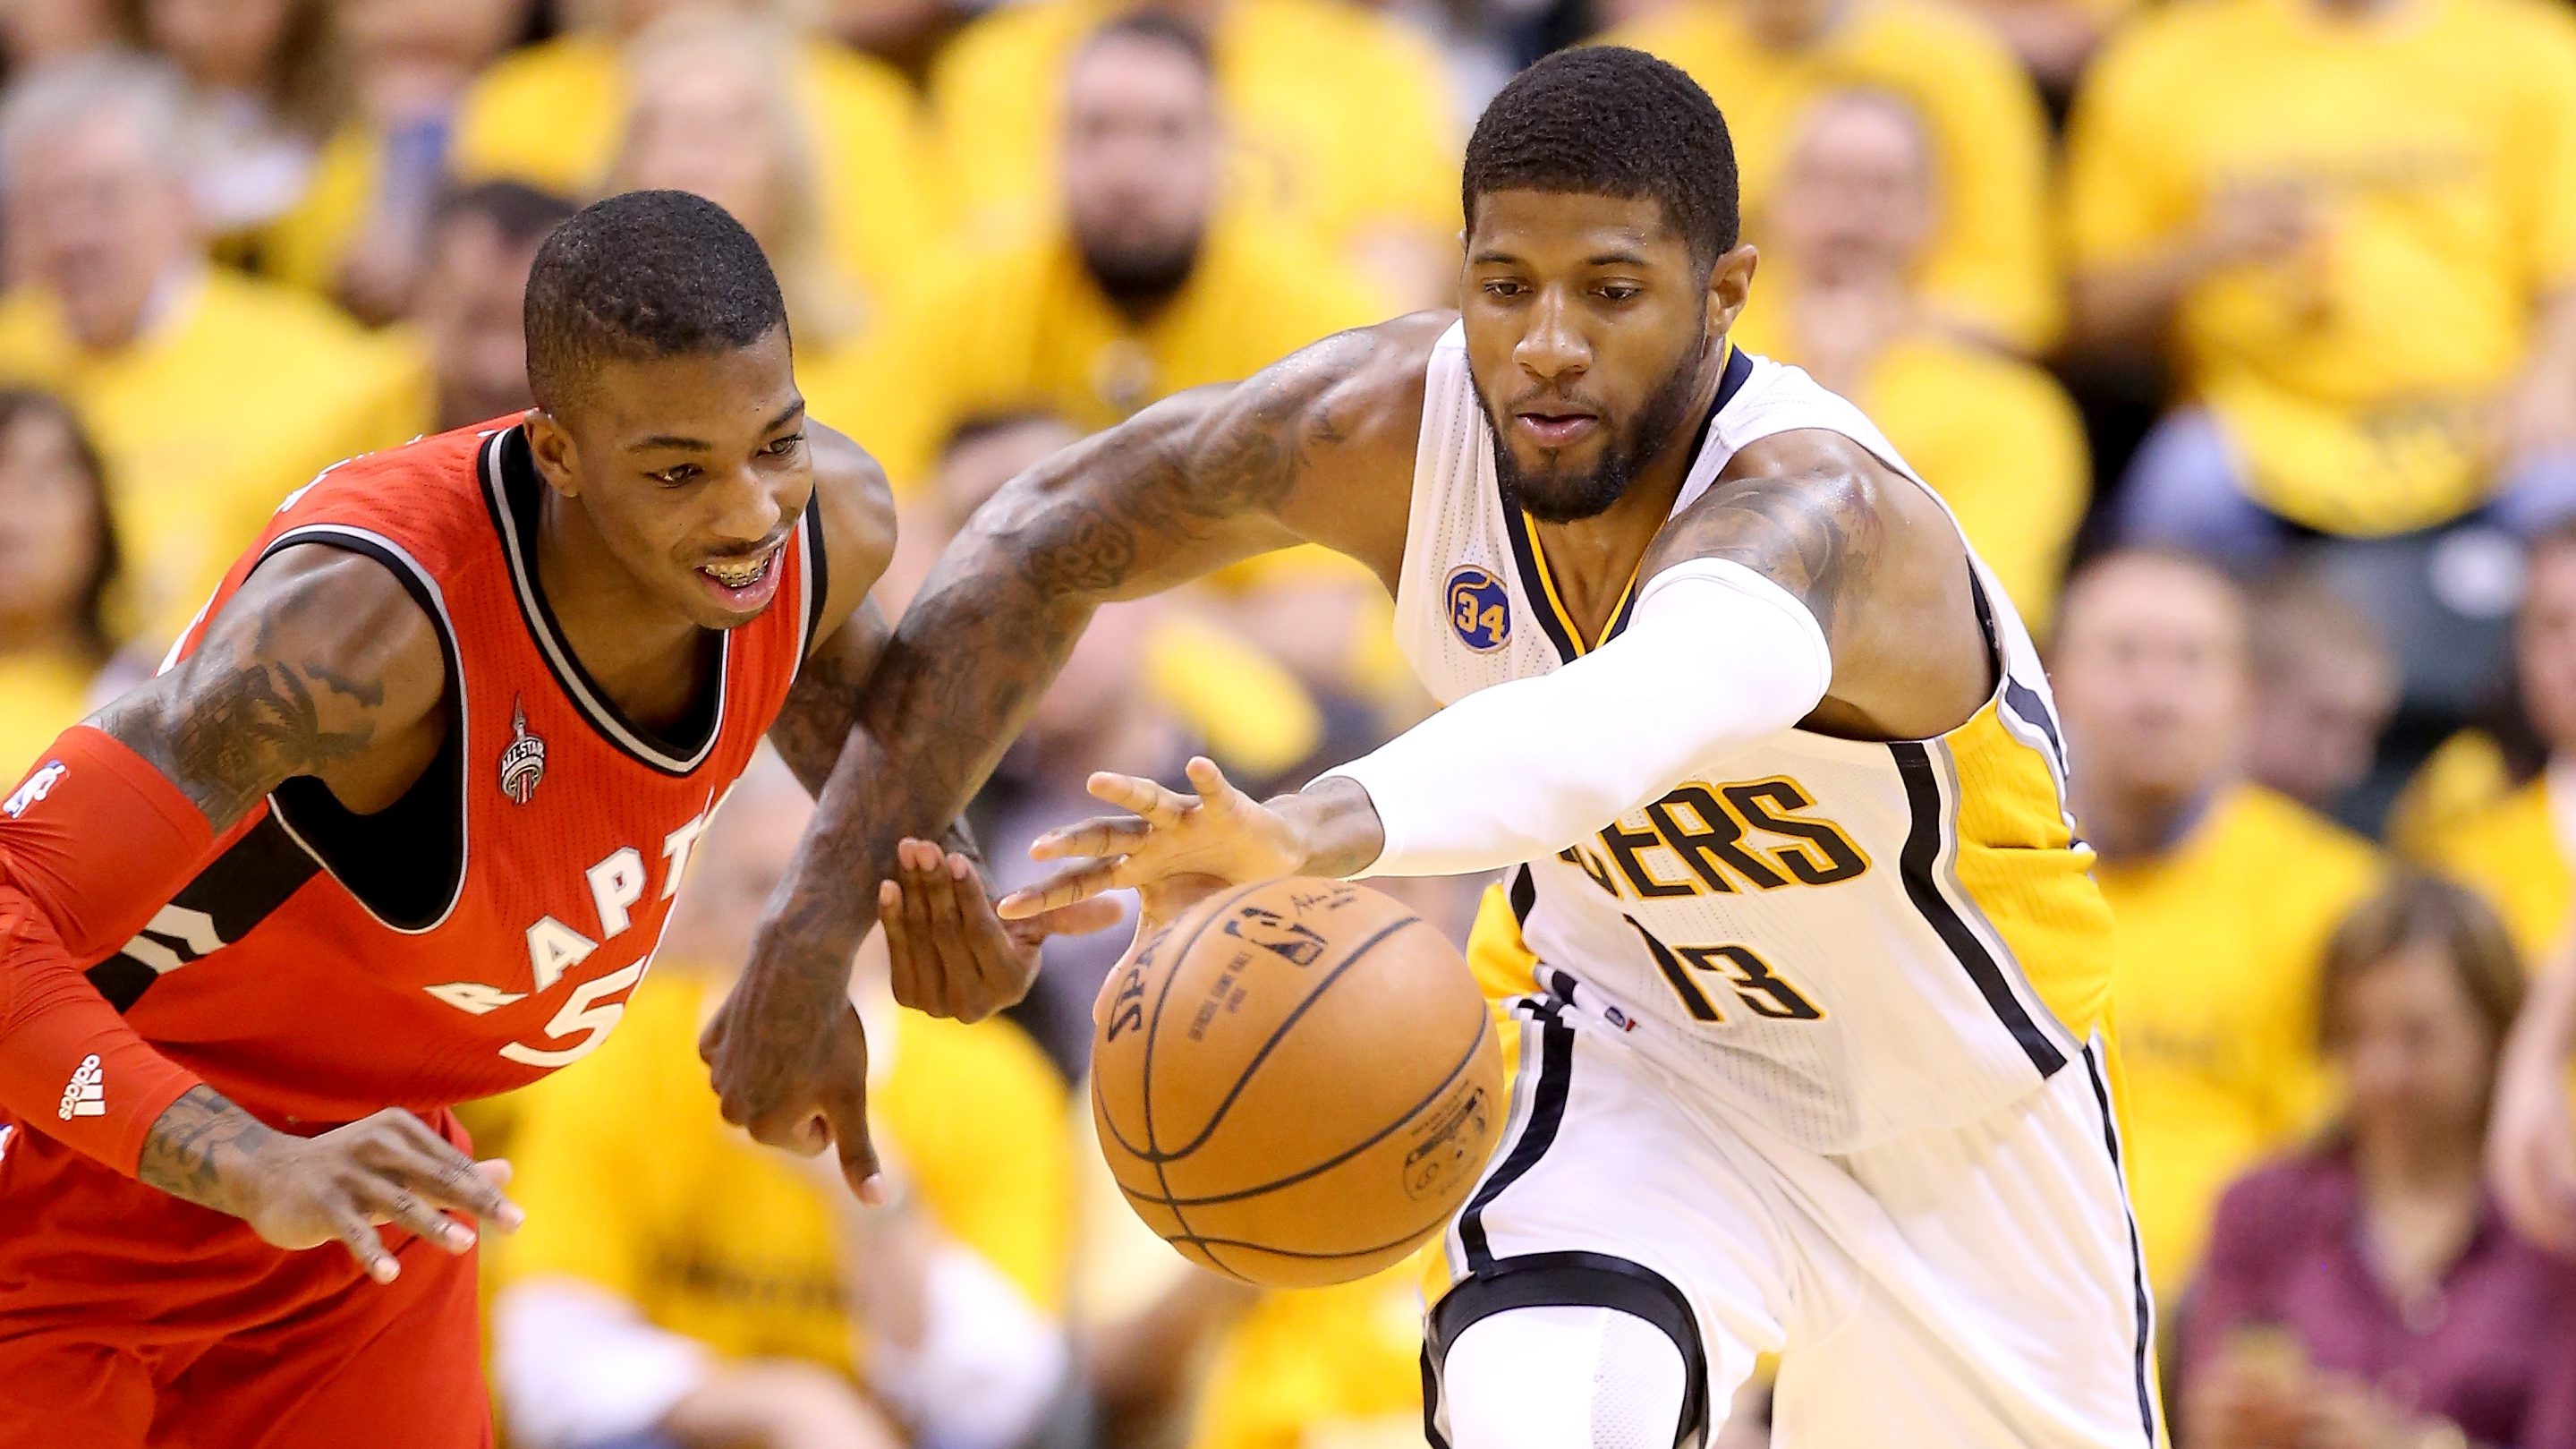 Pacers vs. Raptors Live Stream How to Watch Game 7 for Free